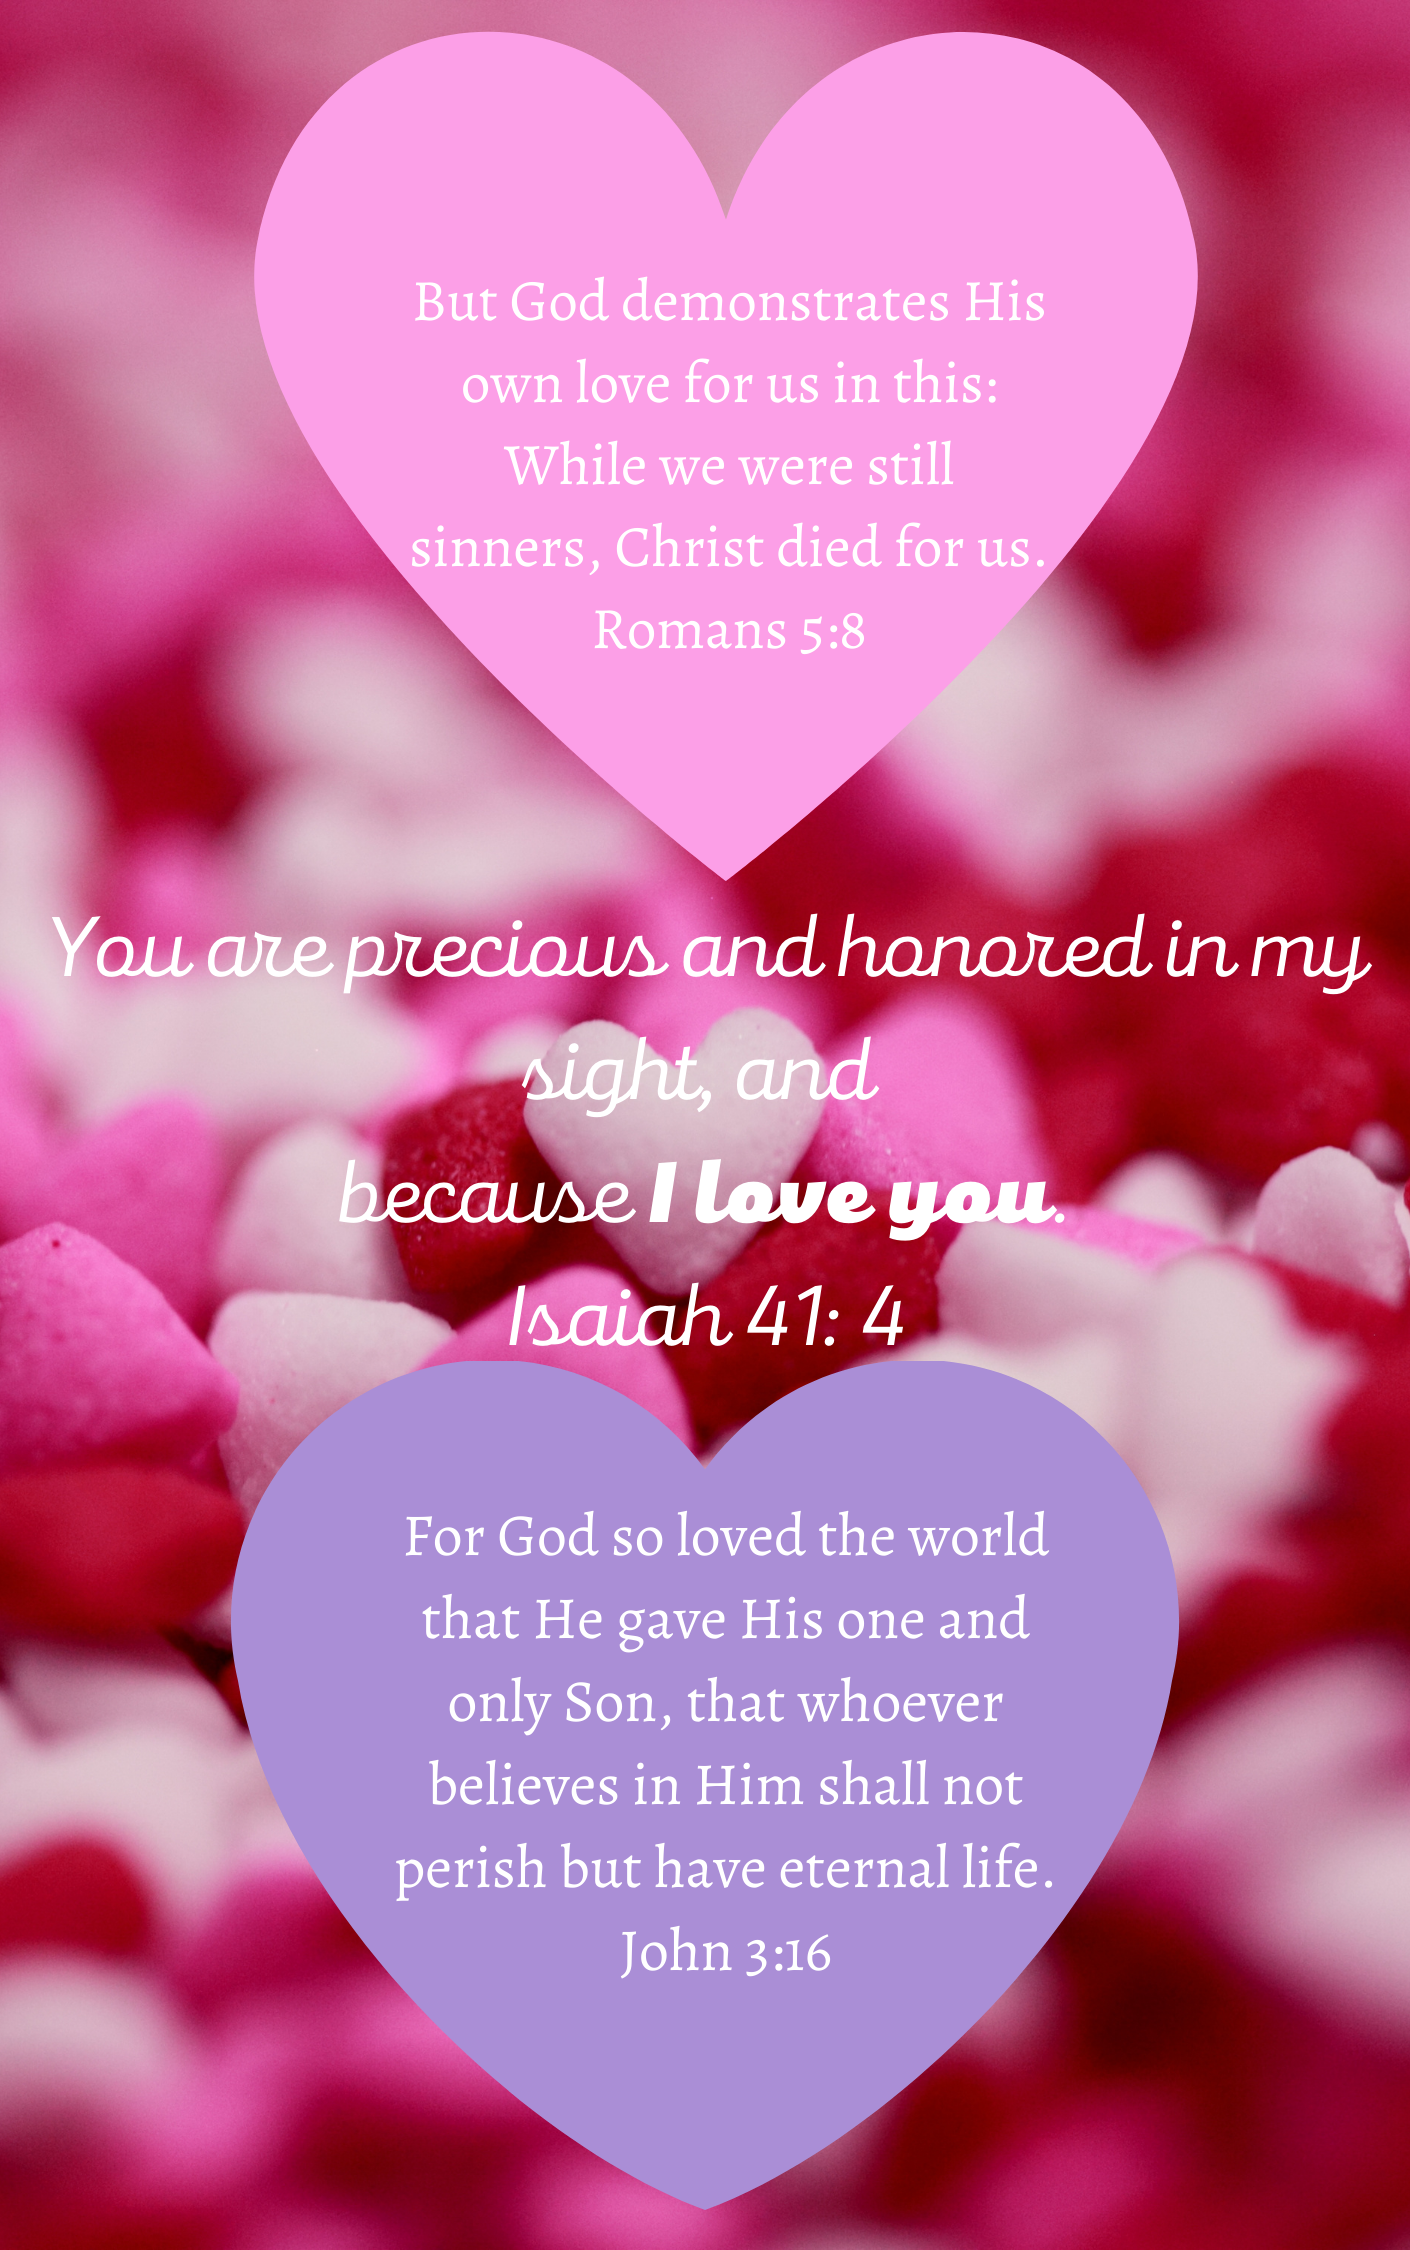 For God so loved the world thatHe gave His one and only Son ,that whoever believes in Him shallnot perish but haveeternal life. -John 316 (1).png